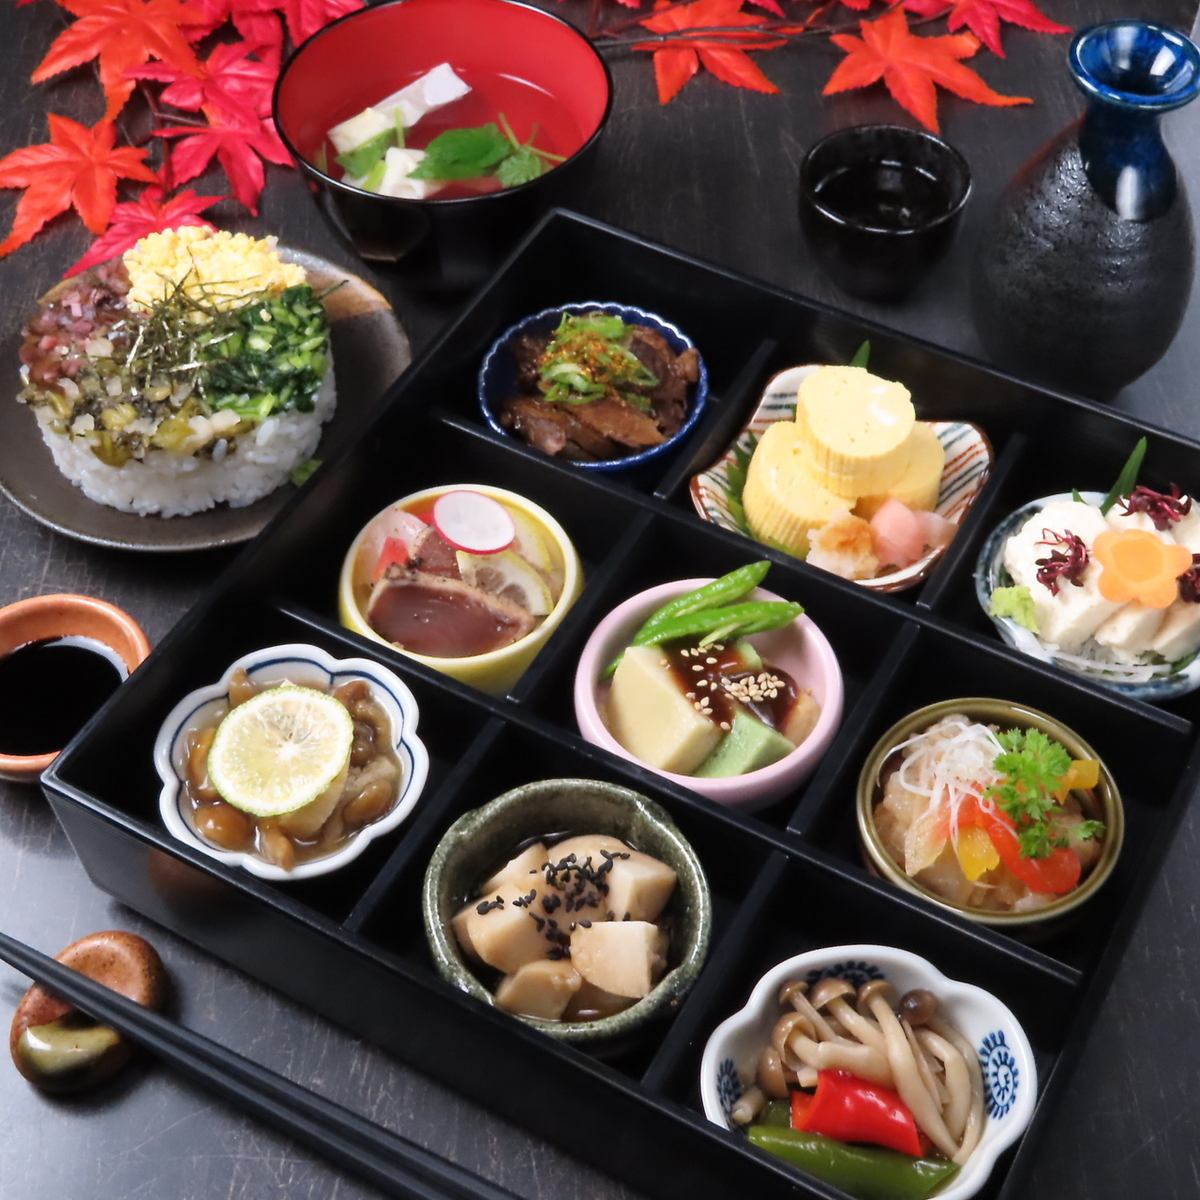 We offer a wide variety of dishes that make the most of seasonal ingredients. If you want to enjoy Kyoto cuisine, Kazuma